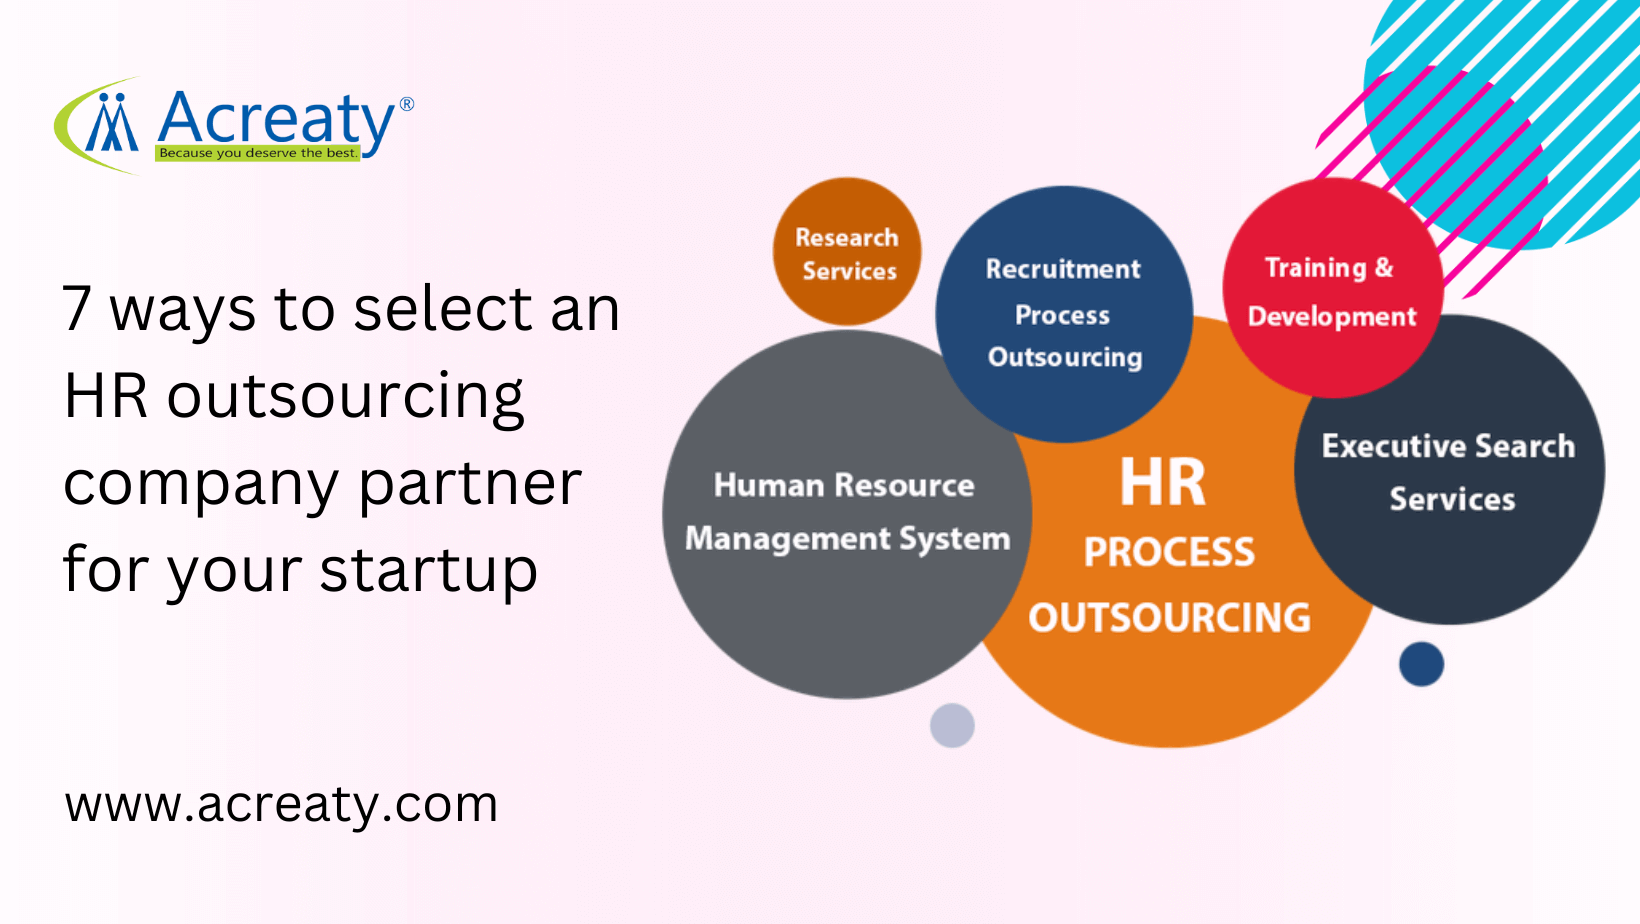 7 ways to select an HR outsourcing company partner for your startup